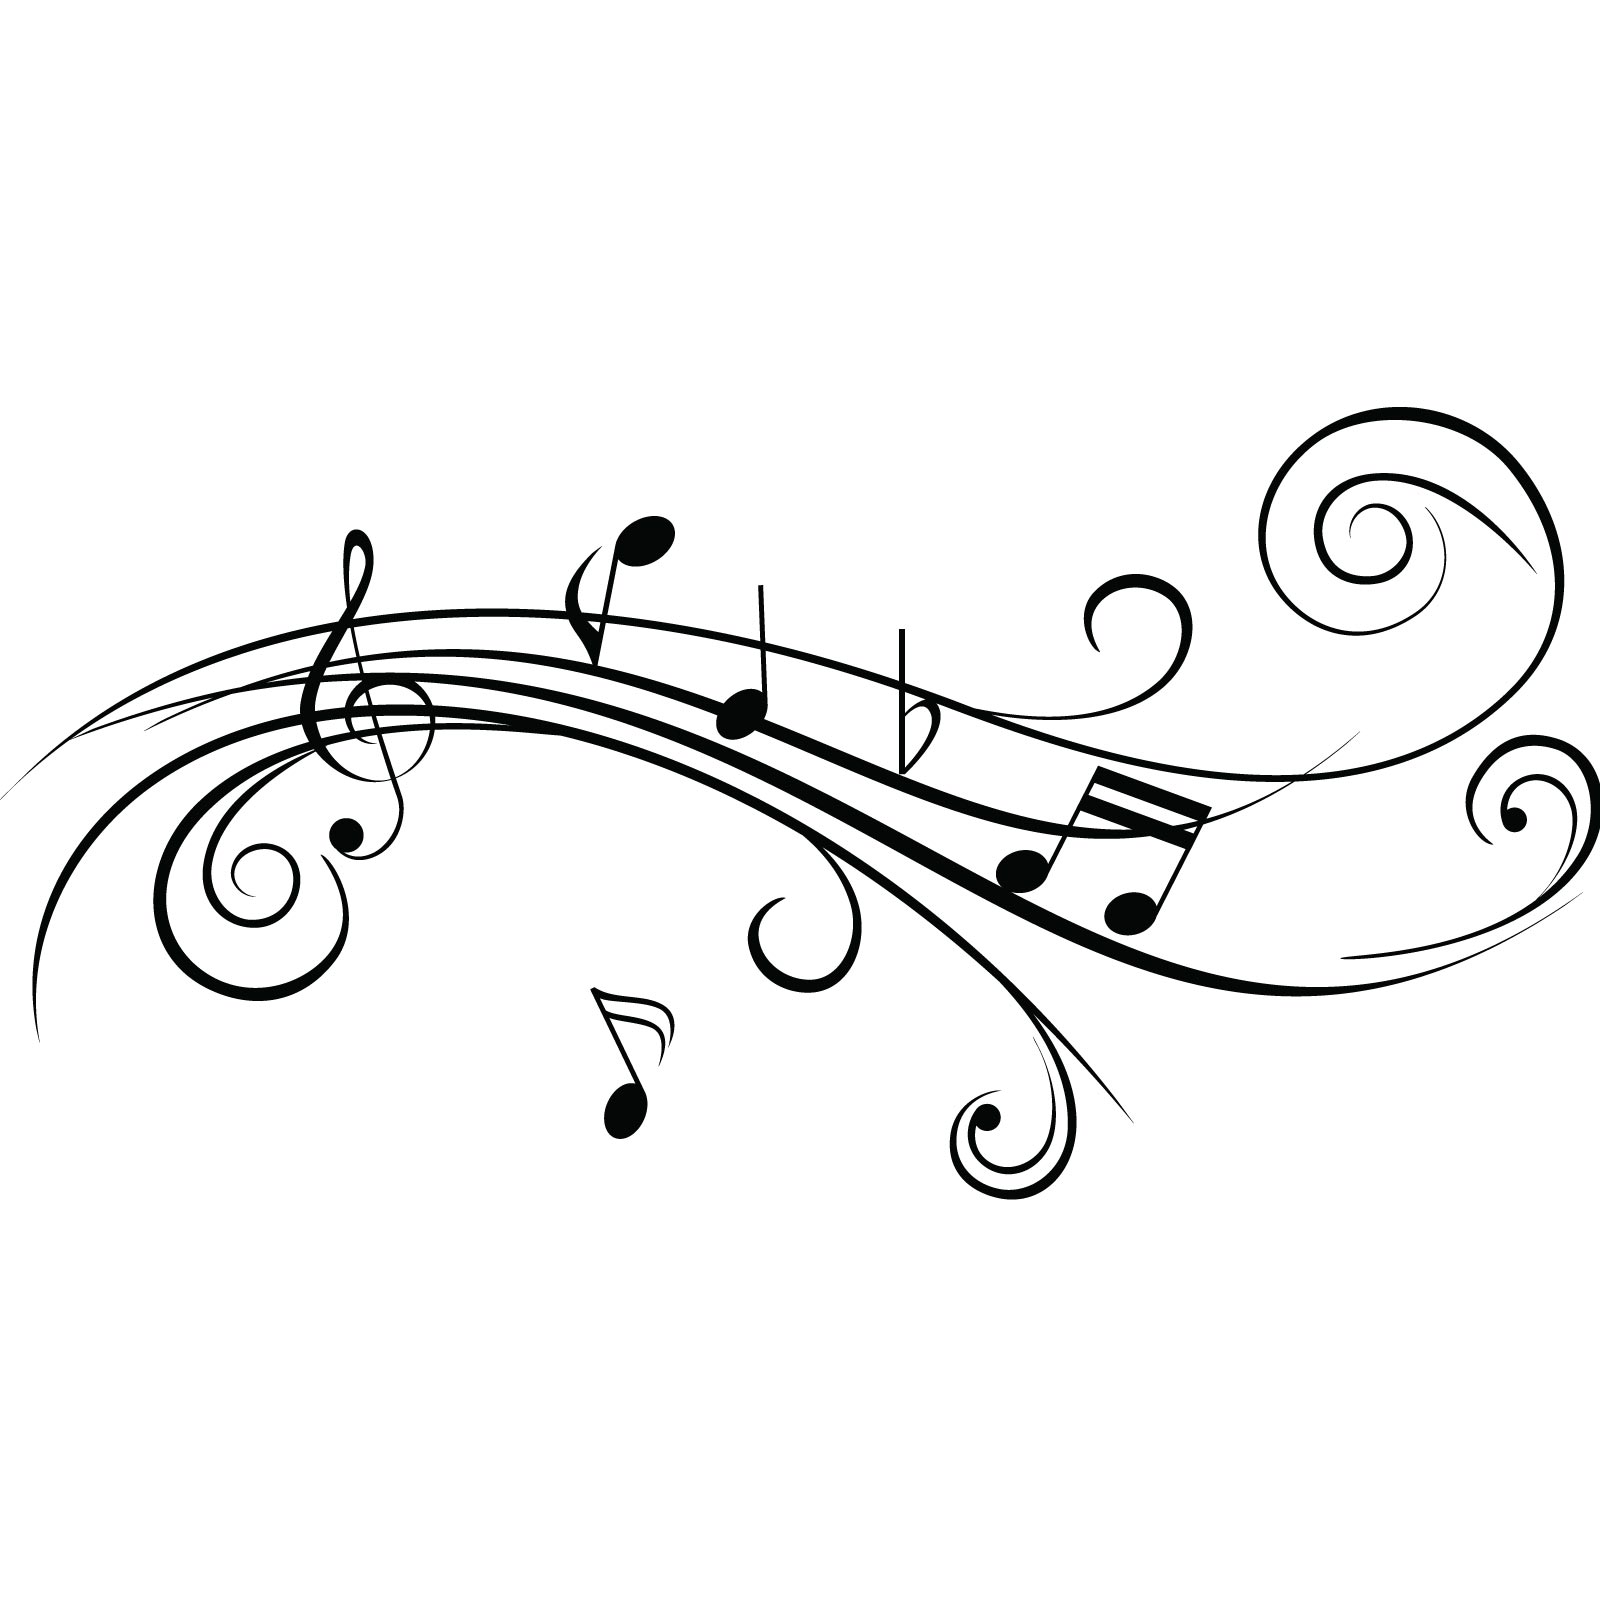 cool music notes pics